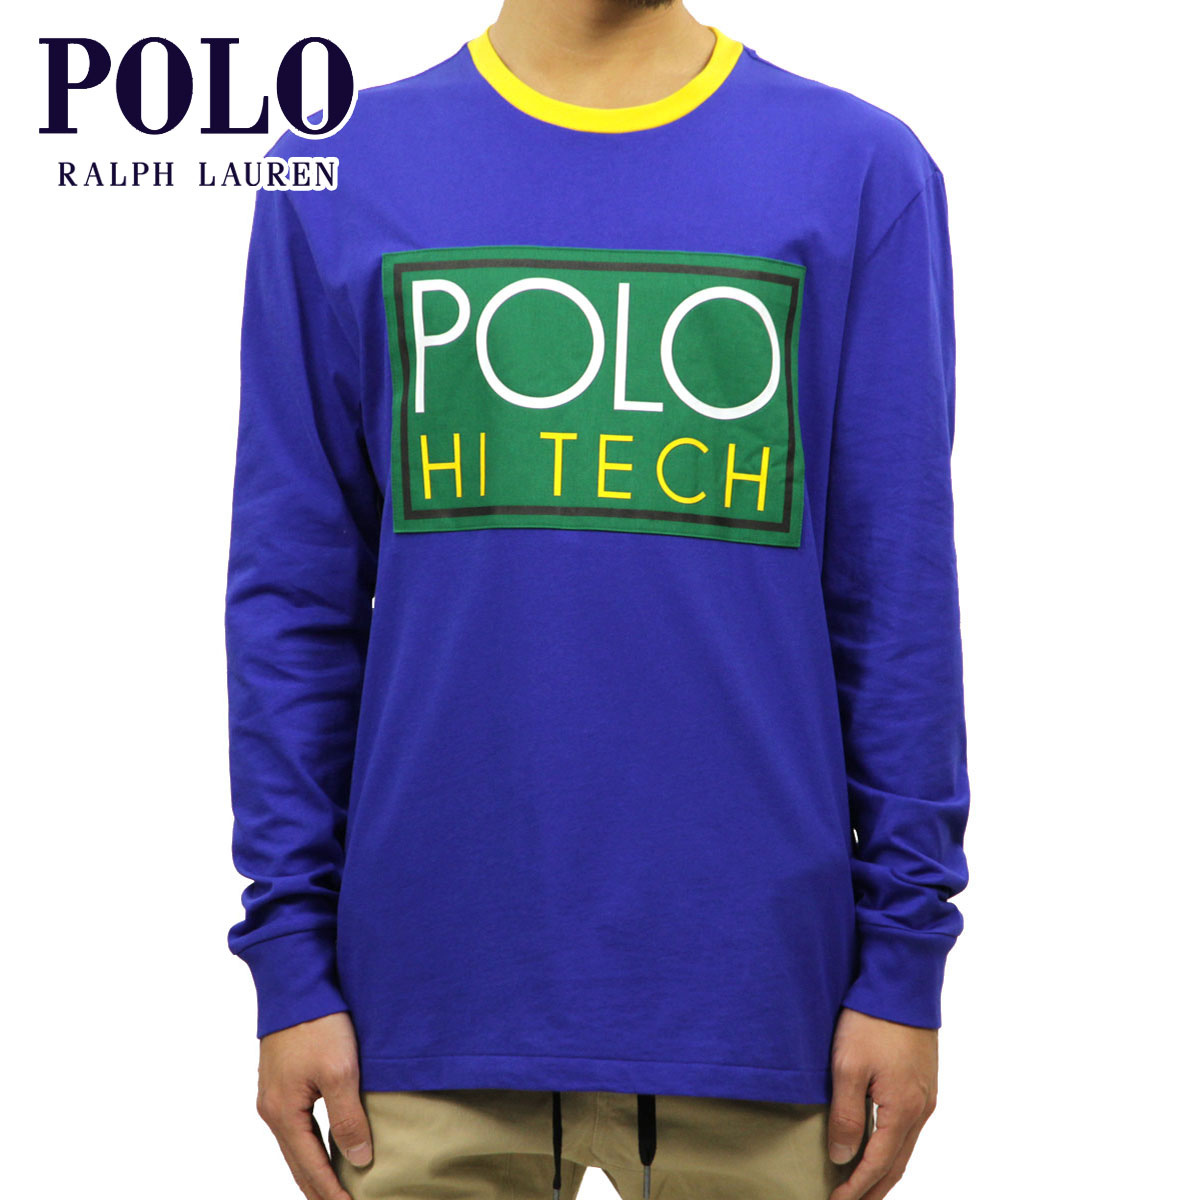 ݥ ե T T   POLO RALPH LAUREN ĹµT HI TECH LOGO GRAPHIC LONG-SLEEVE T-SHIRT RUGBY ROYAL